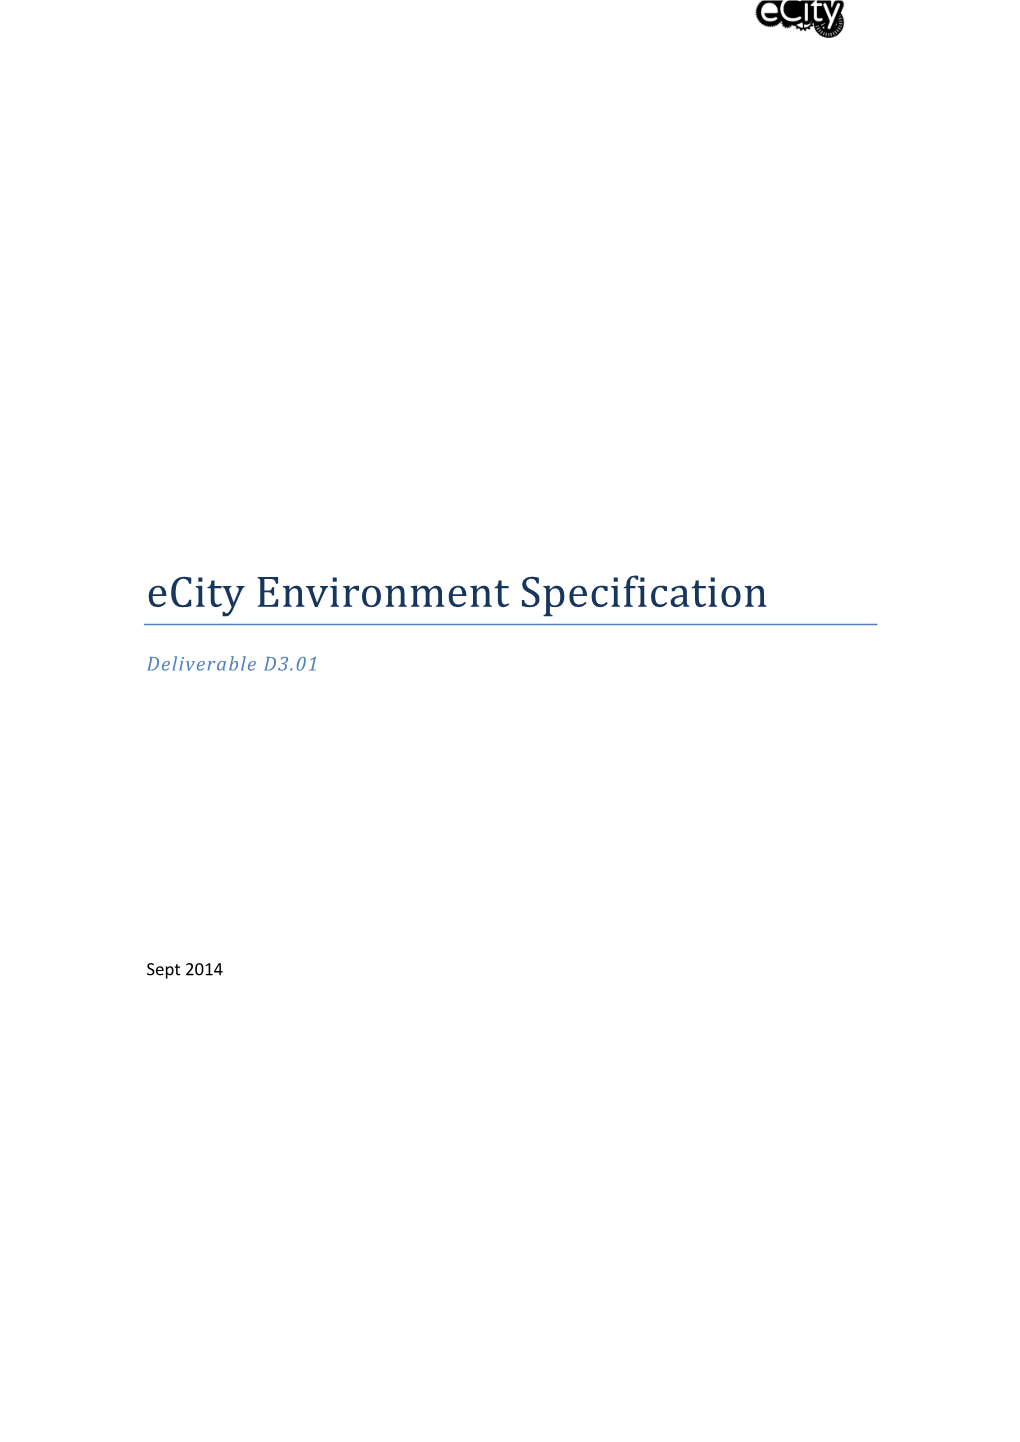 Ecity Environment Specification